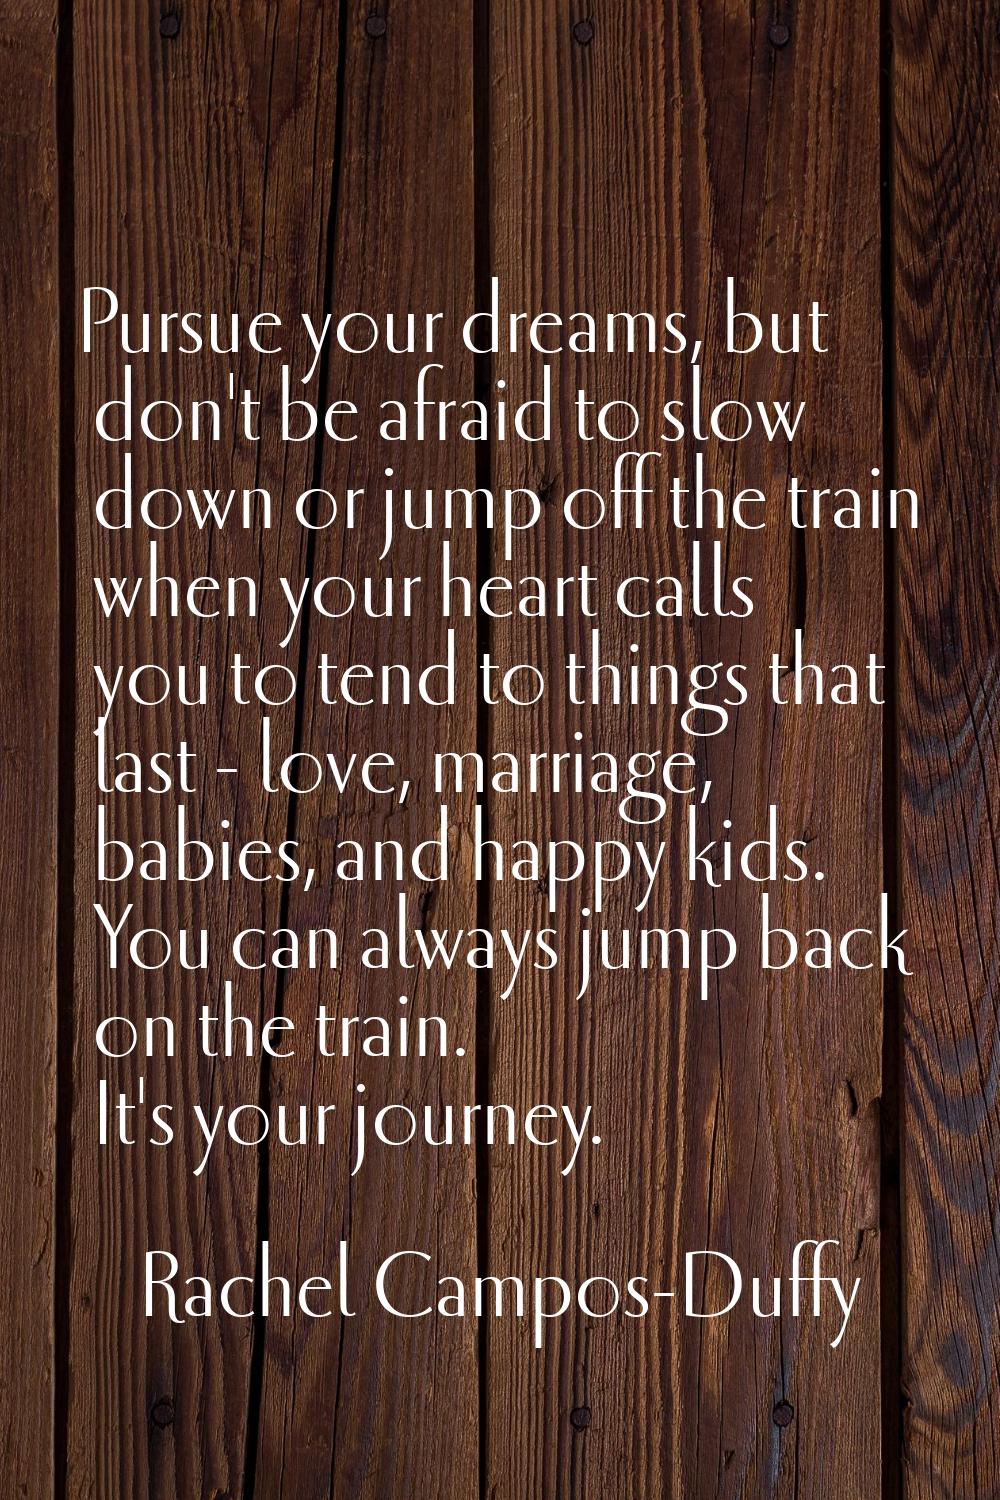 Pursue your dreams, but don't be afraid to slow down or jump off the train when your heart calls yo